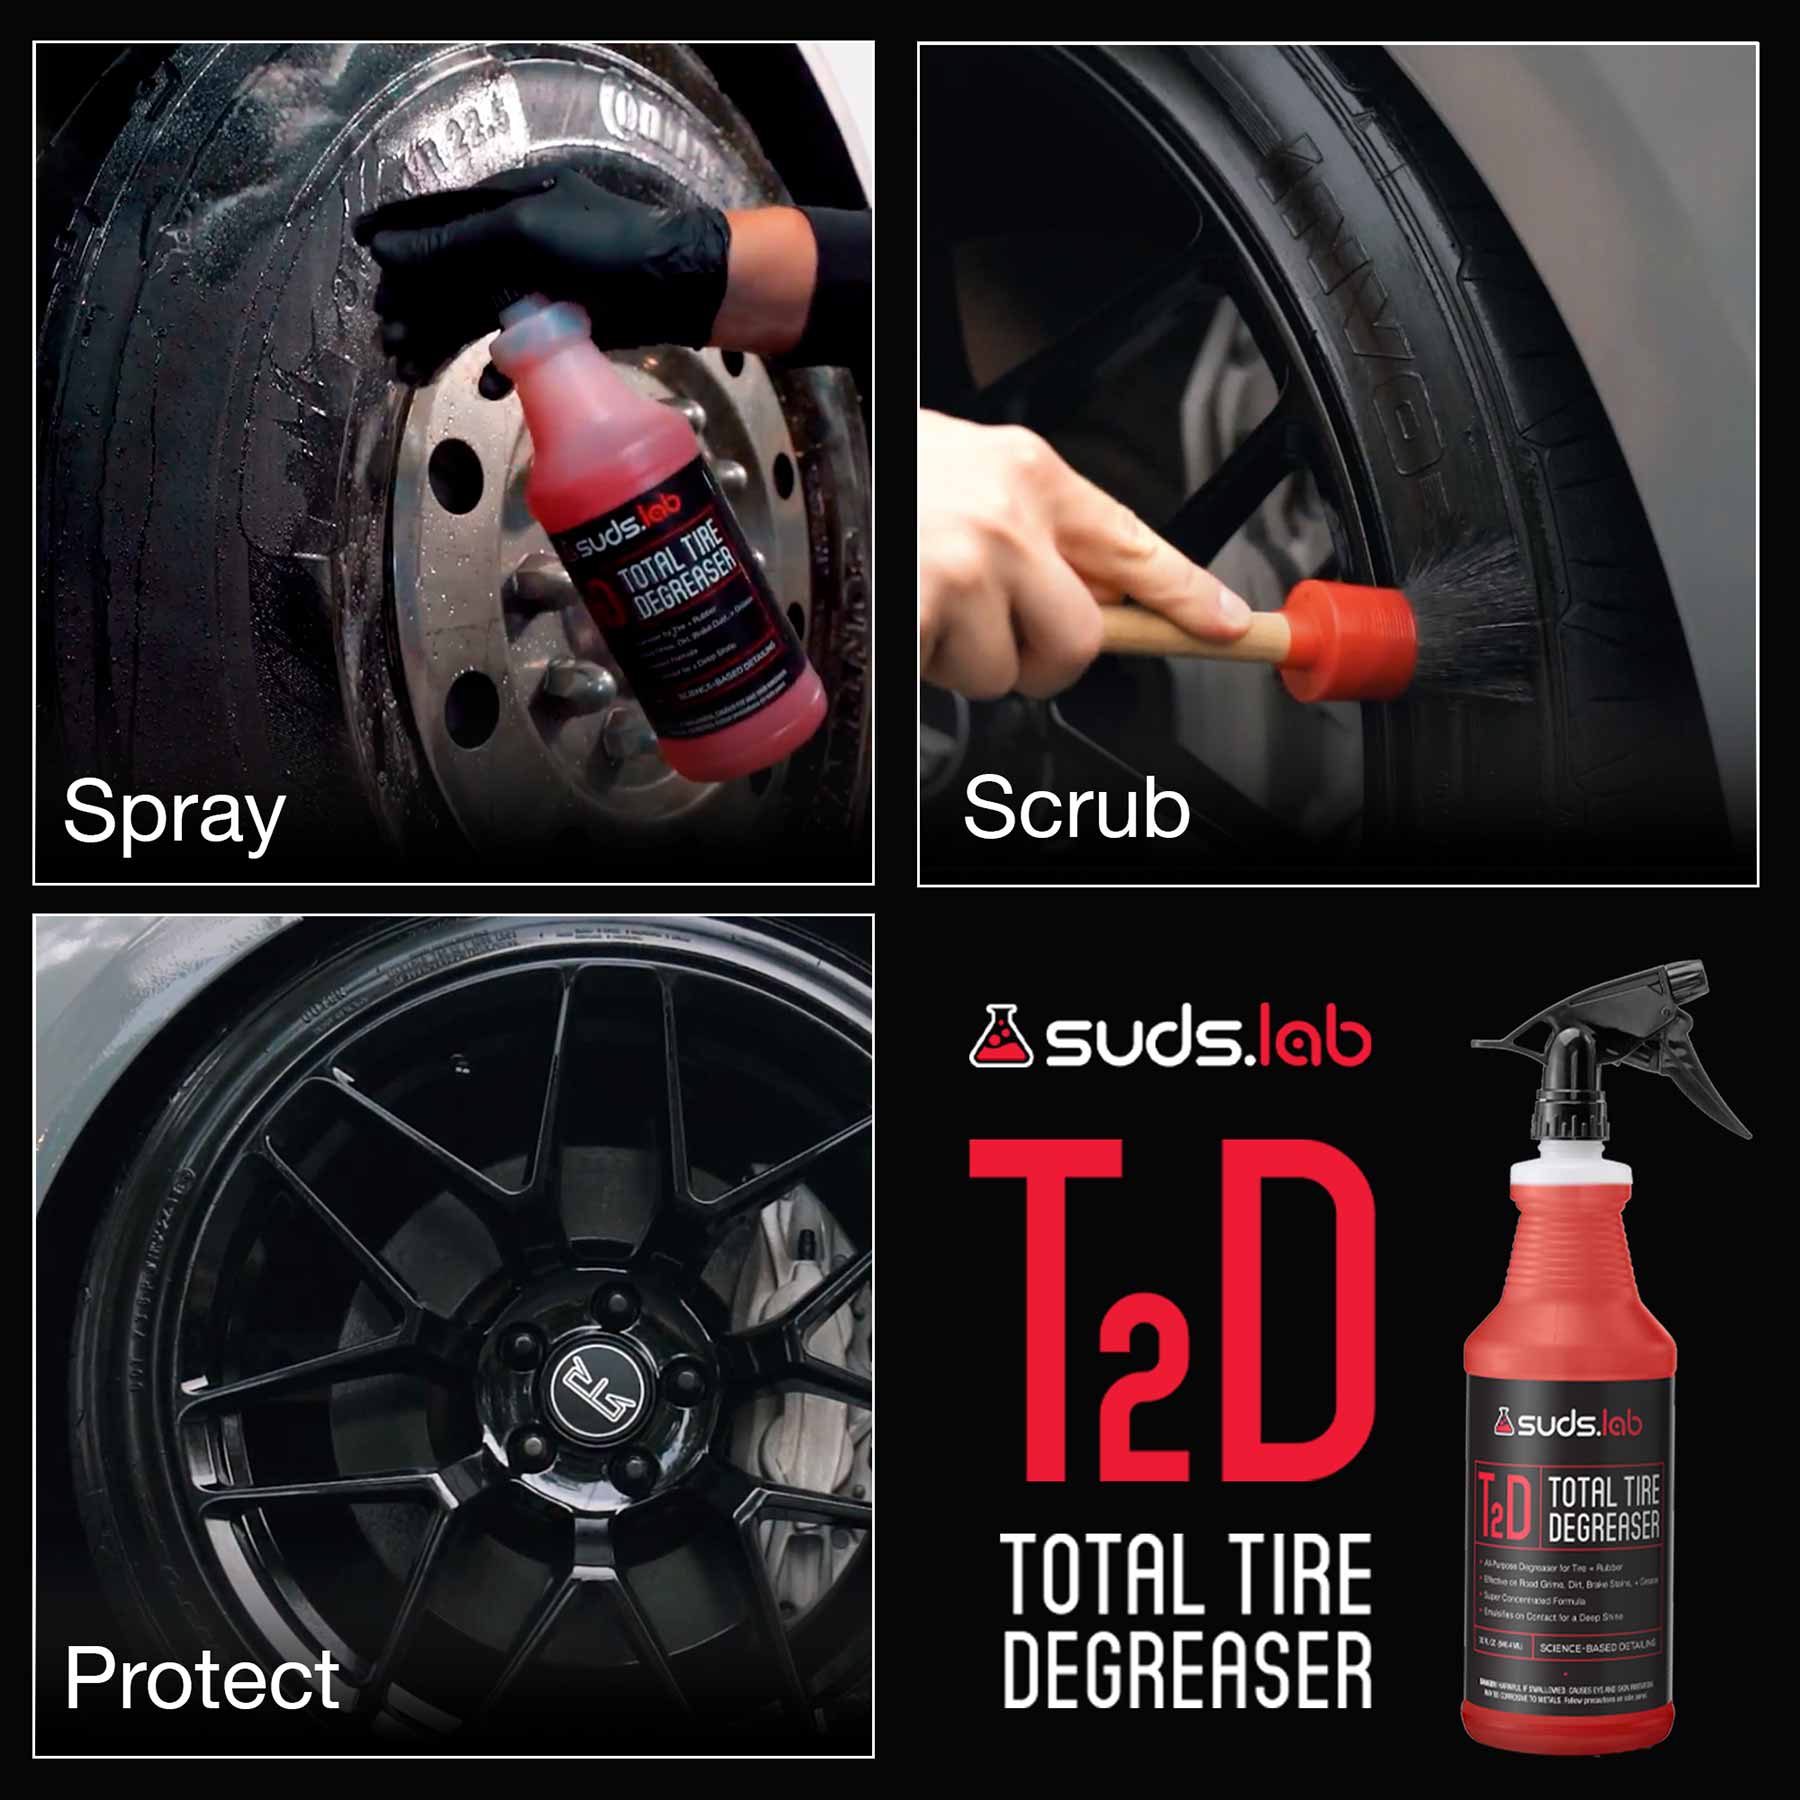 Suds Lab XA Zero-Acid Wheel Cleaner - Cleans Brake Dust and Grime for Car Rims and Tires - Safe on Chrome, Alloy and Aluminum Rims - 64 oz